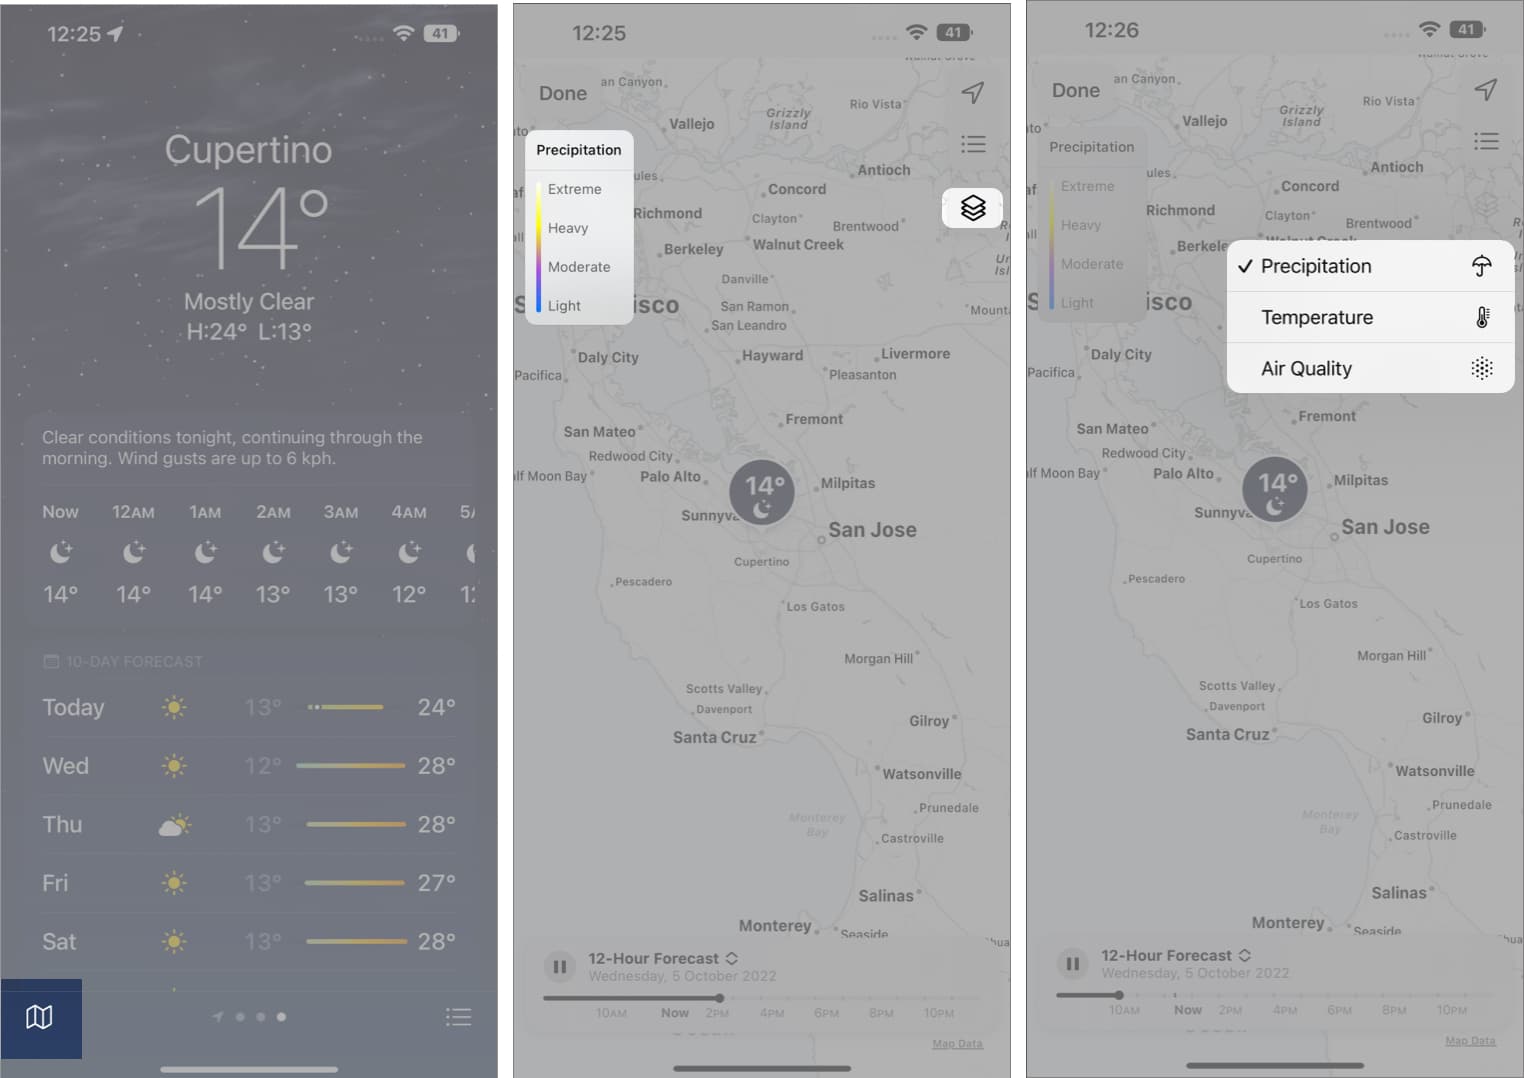 Tap layers icon to switch between Precipitation, Temperature, and Air Quality